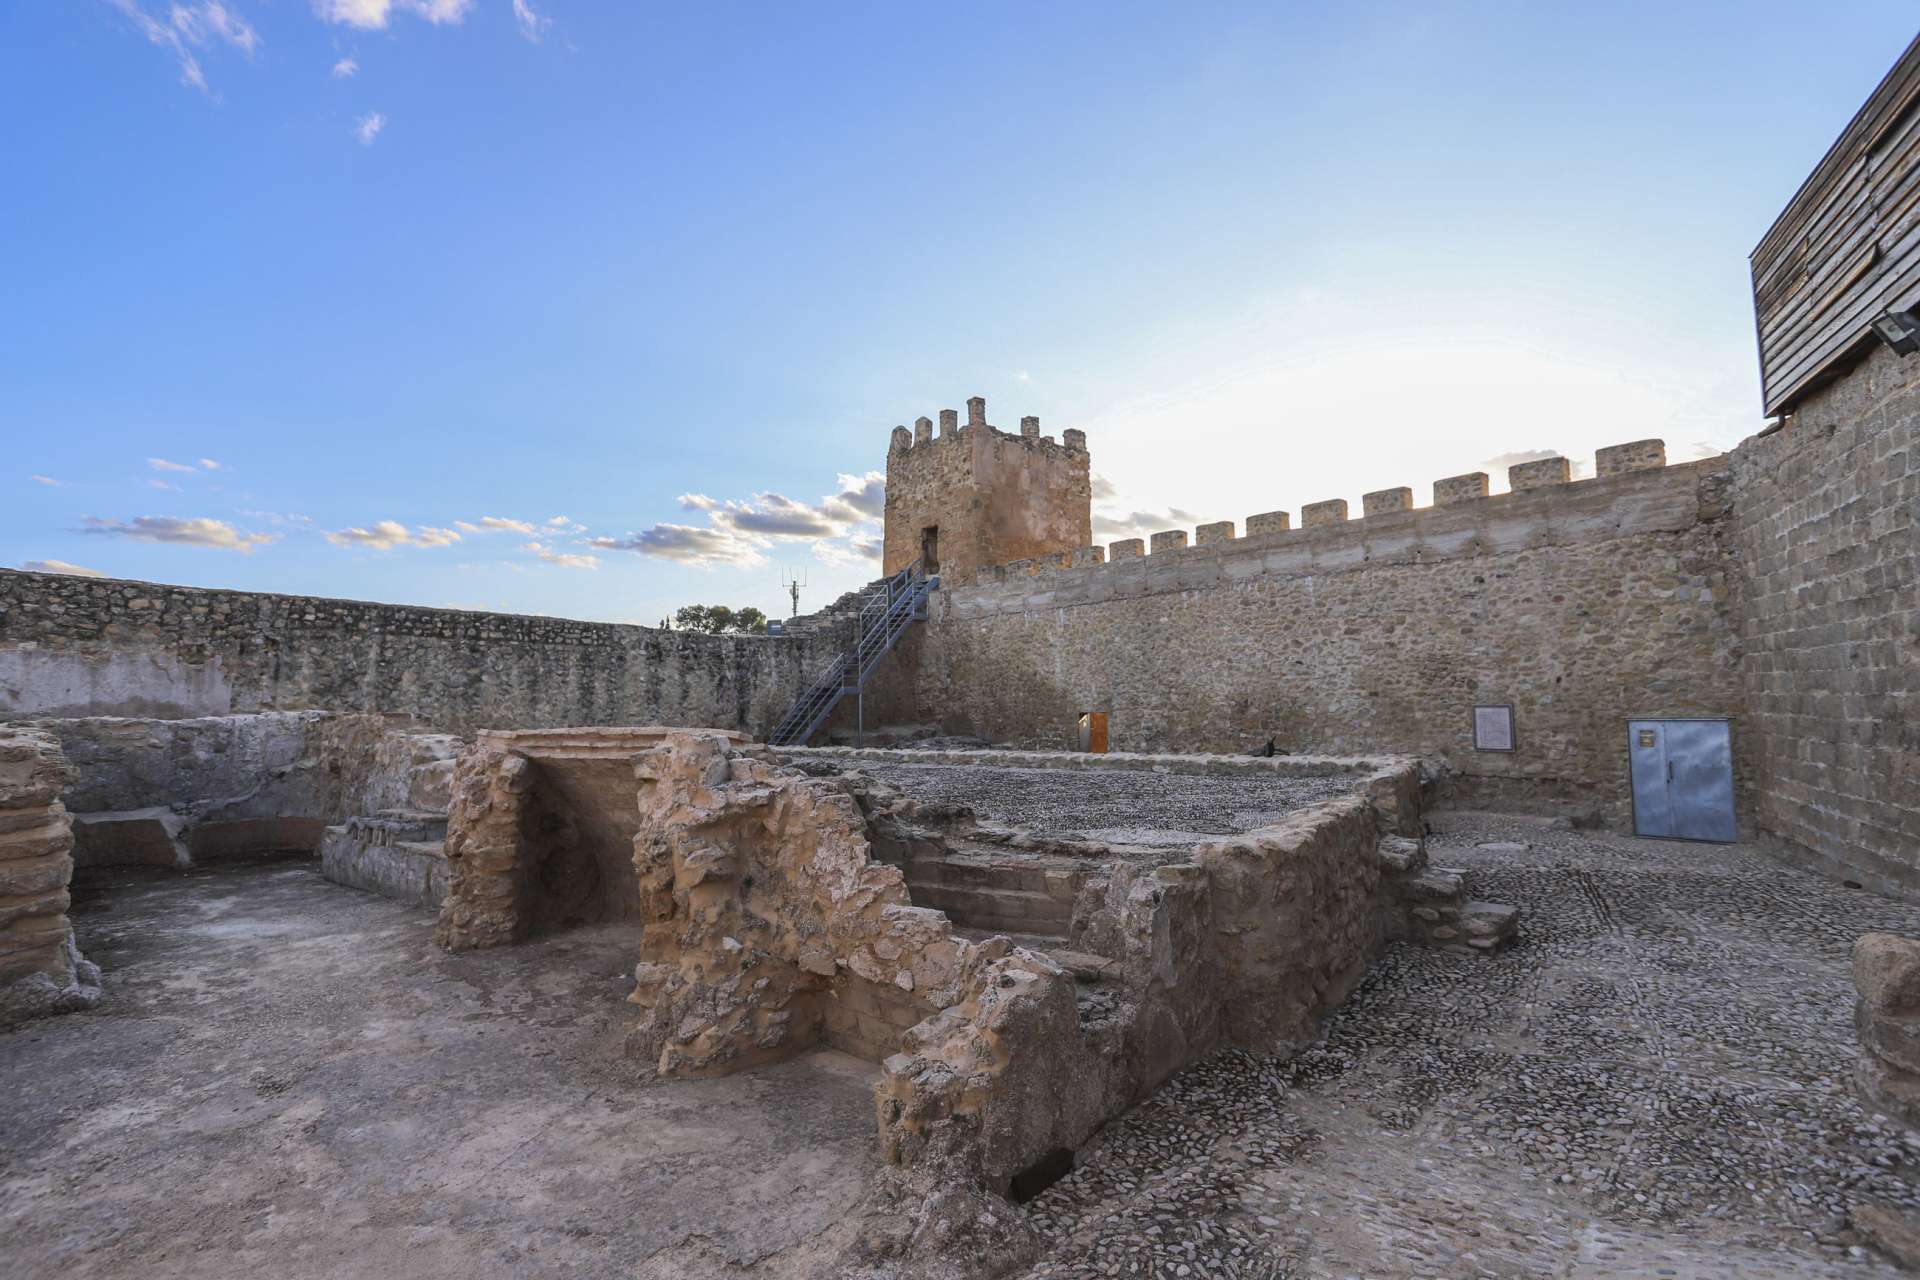 OPENING HOURS AND PRICES OF THE CASTLE OF IZNÁJAR - HISN-ASHAR